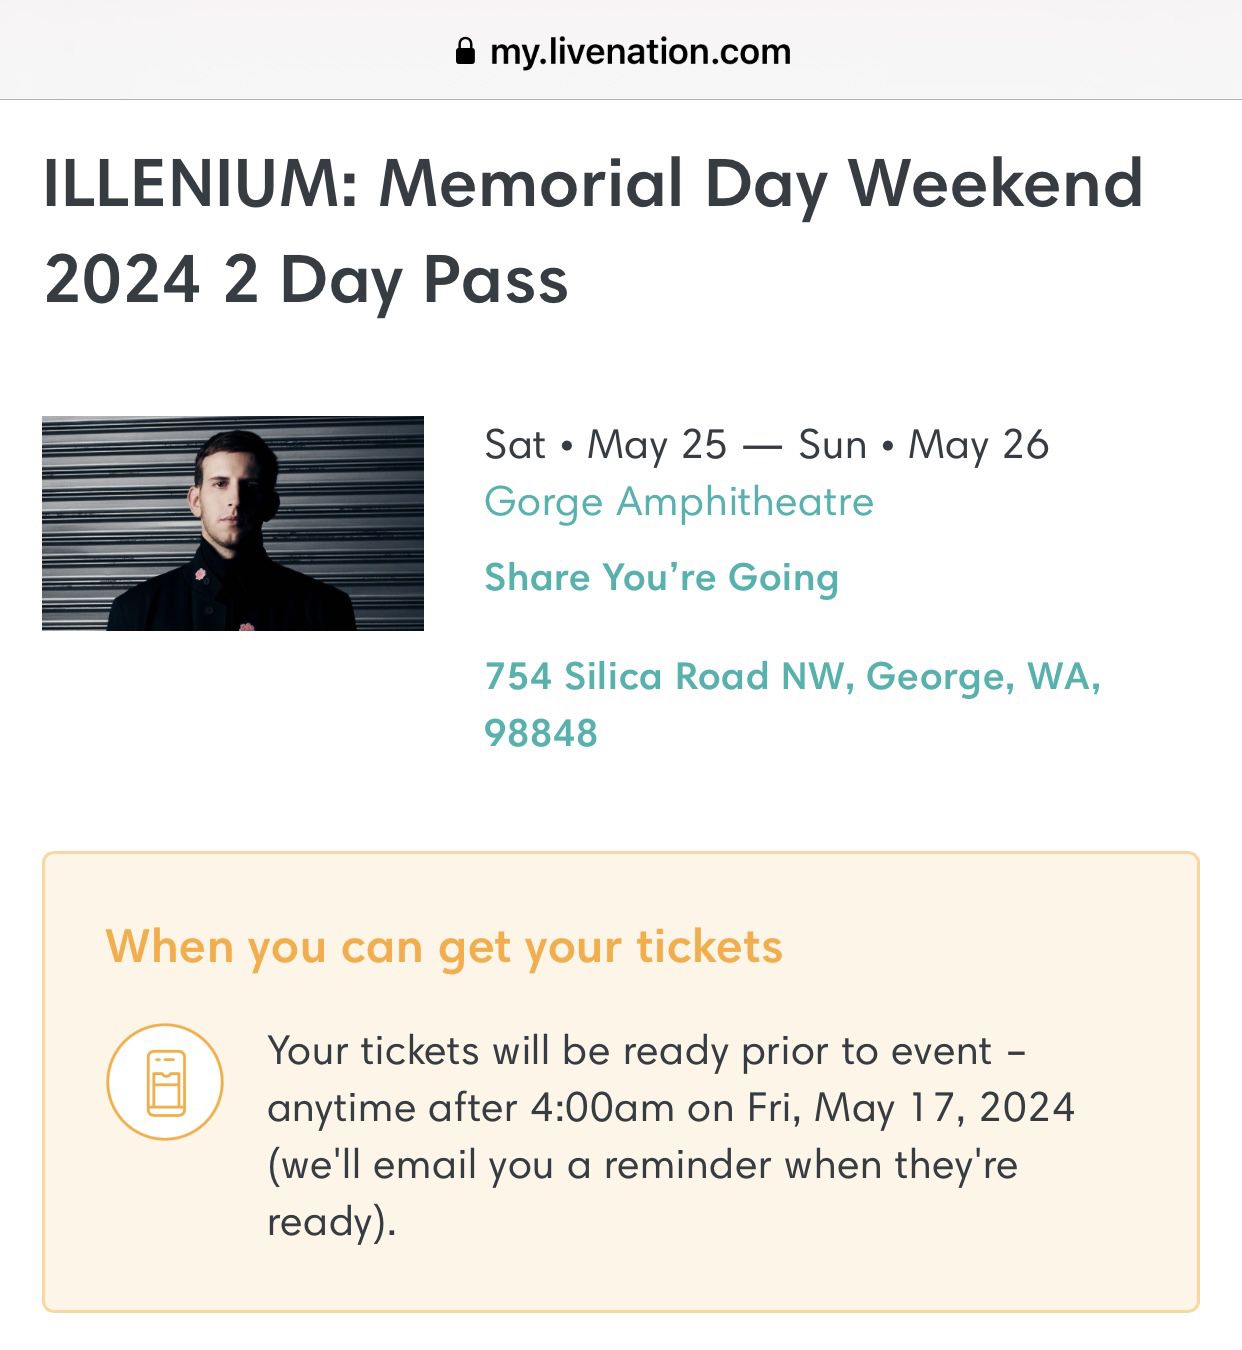 Selling 2 ILLENIUM Tickets: Memorial Day Weekend 2024 - 2 Day Pass